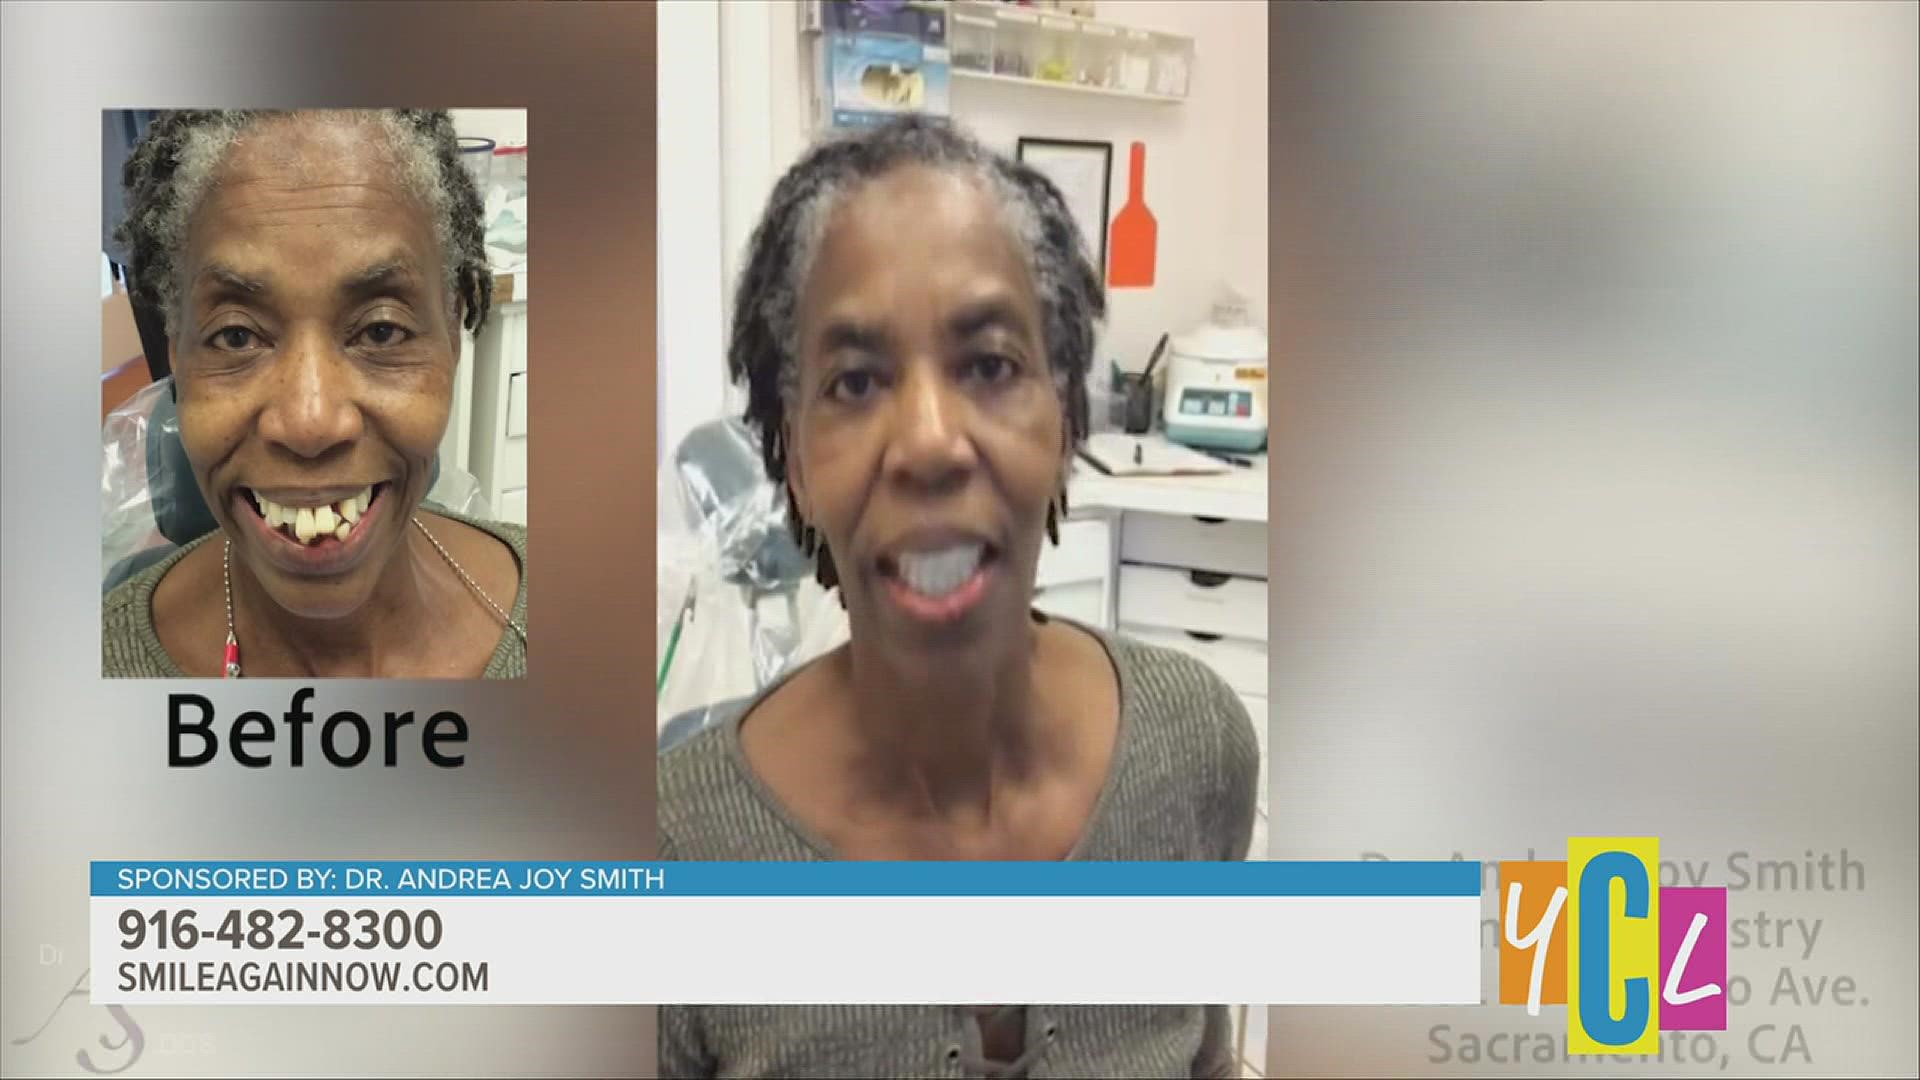 Dr. Andrea Joy Smith is helping her patients feel confident with their dental treatment services! This segment is paid by Dr. Andrea Joy Smith.